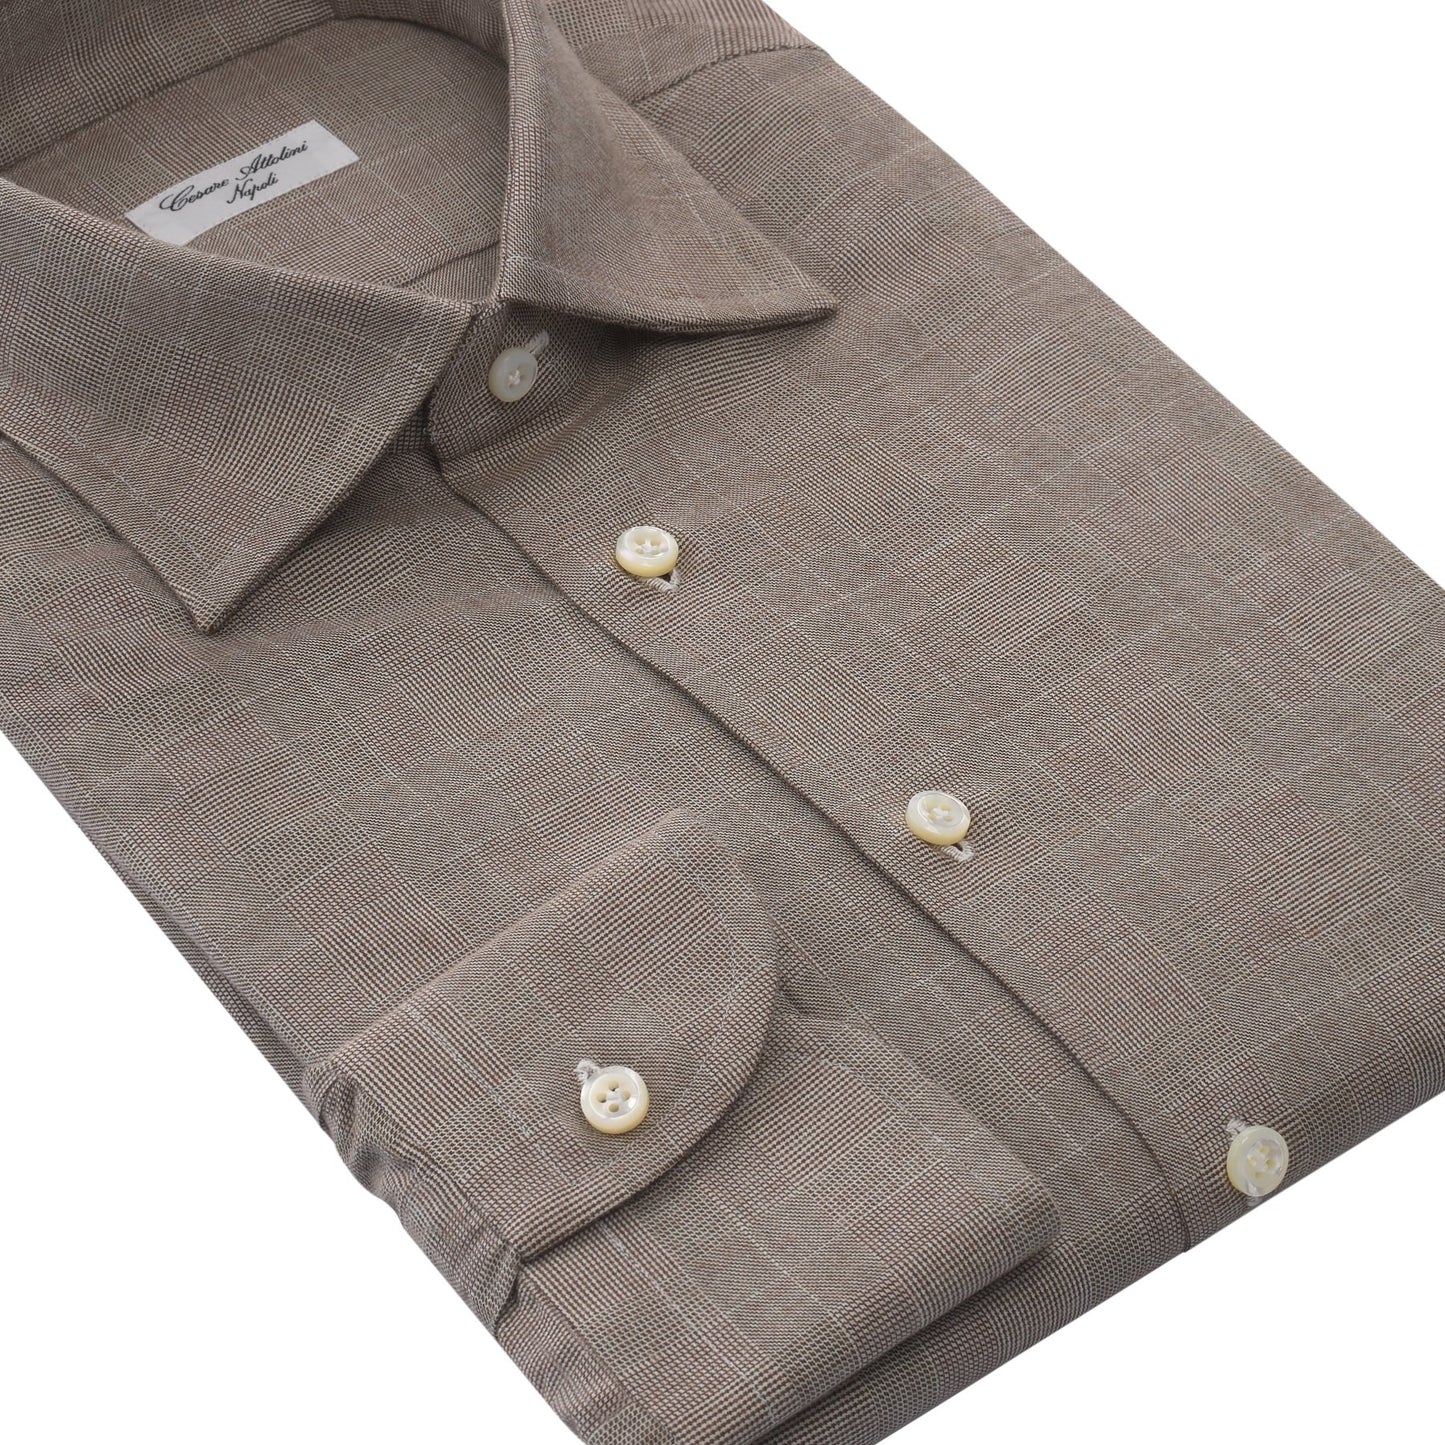 Cesare Attolini Prince of Wales Cotton Shirt in Light Brown - SARTALE